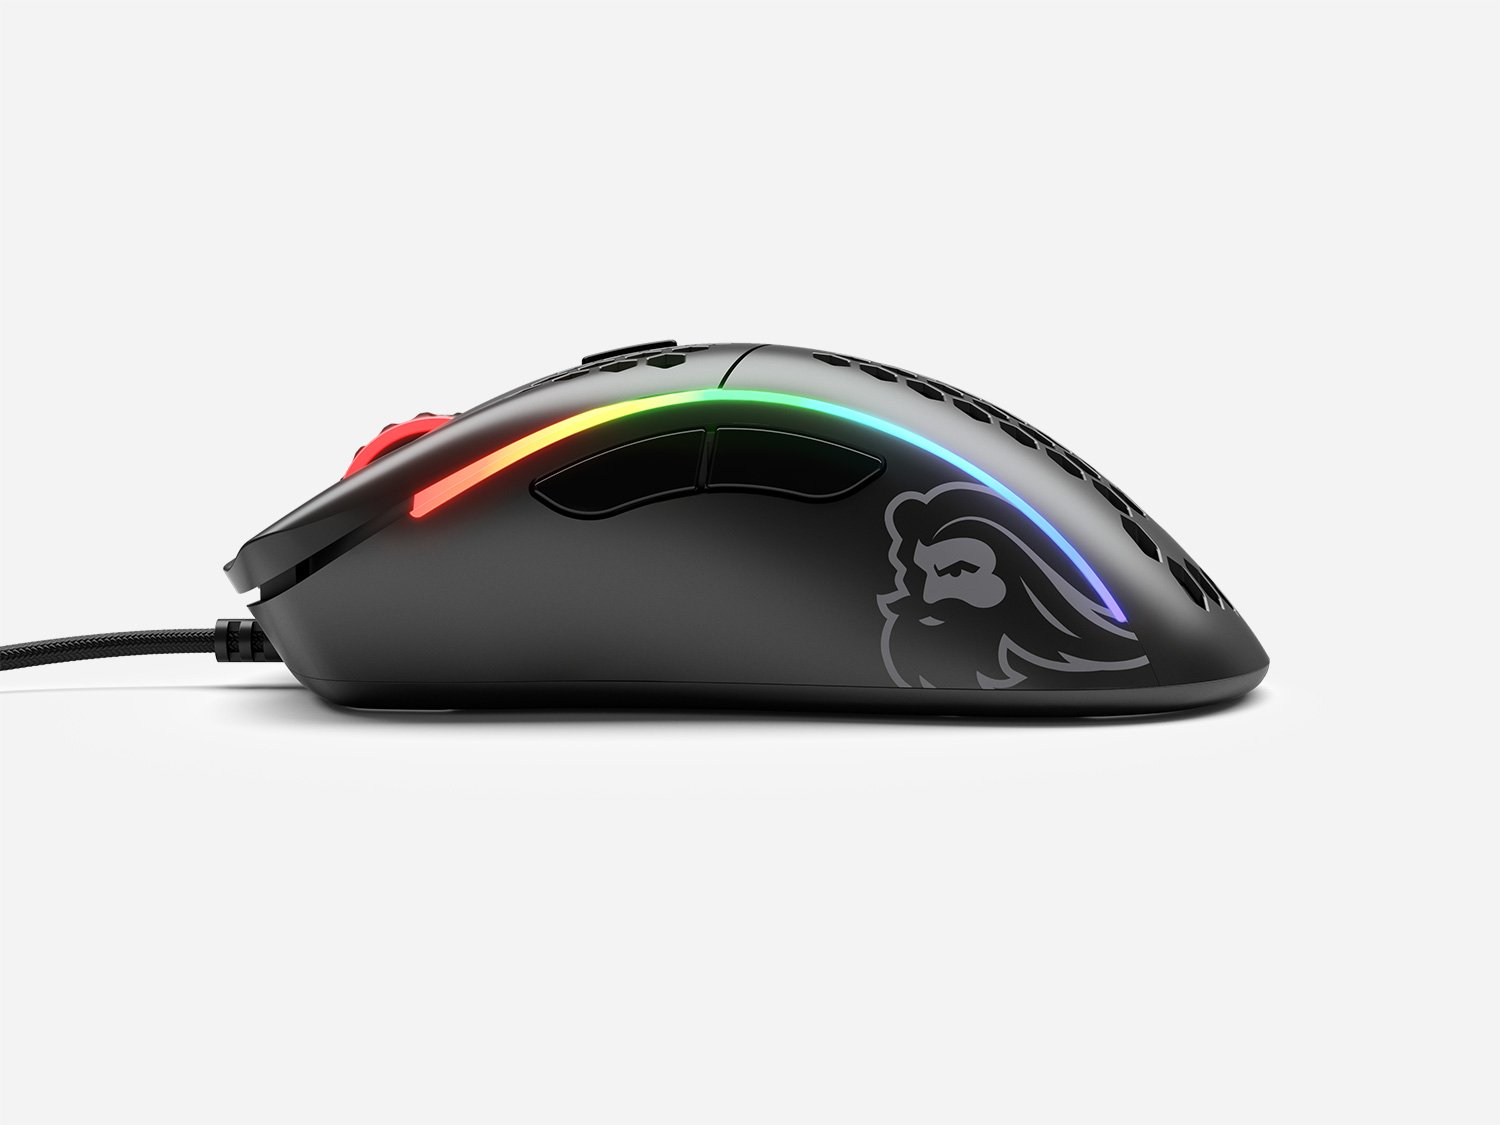 Glorious Gives Consumers The Model D Lightweight Gaming Mouse